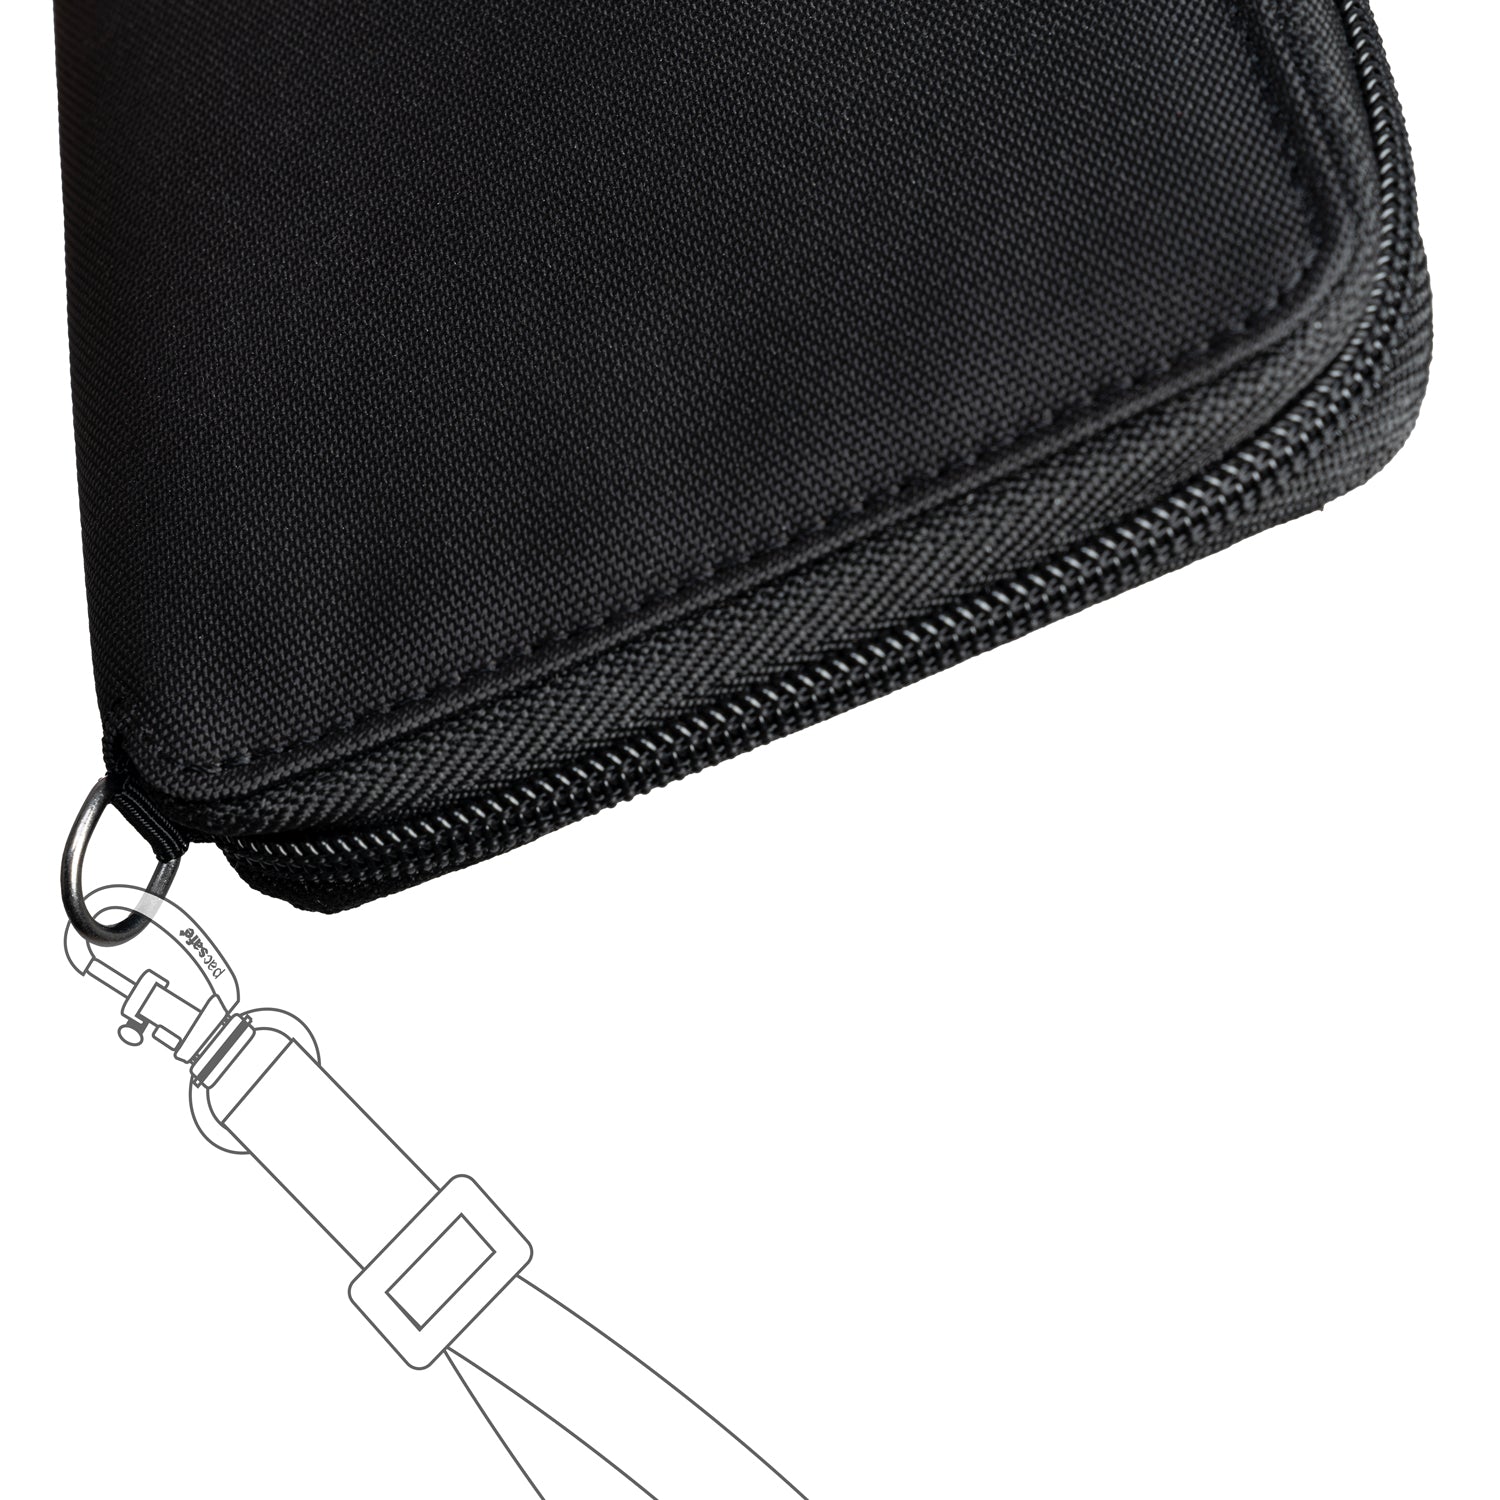 Pacsafe Coversafe V50 - RFID Blocking Passport Protector by Pacsafe ( Coversafe-V50-PP)